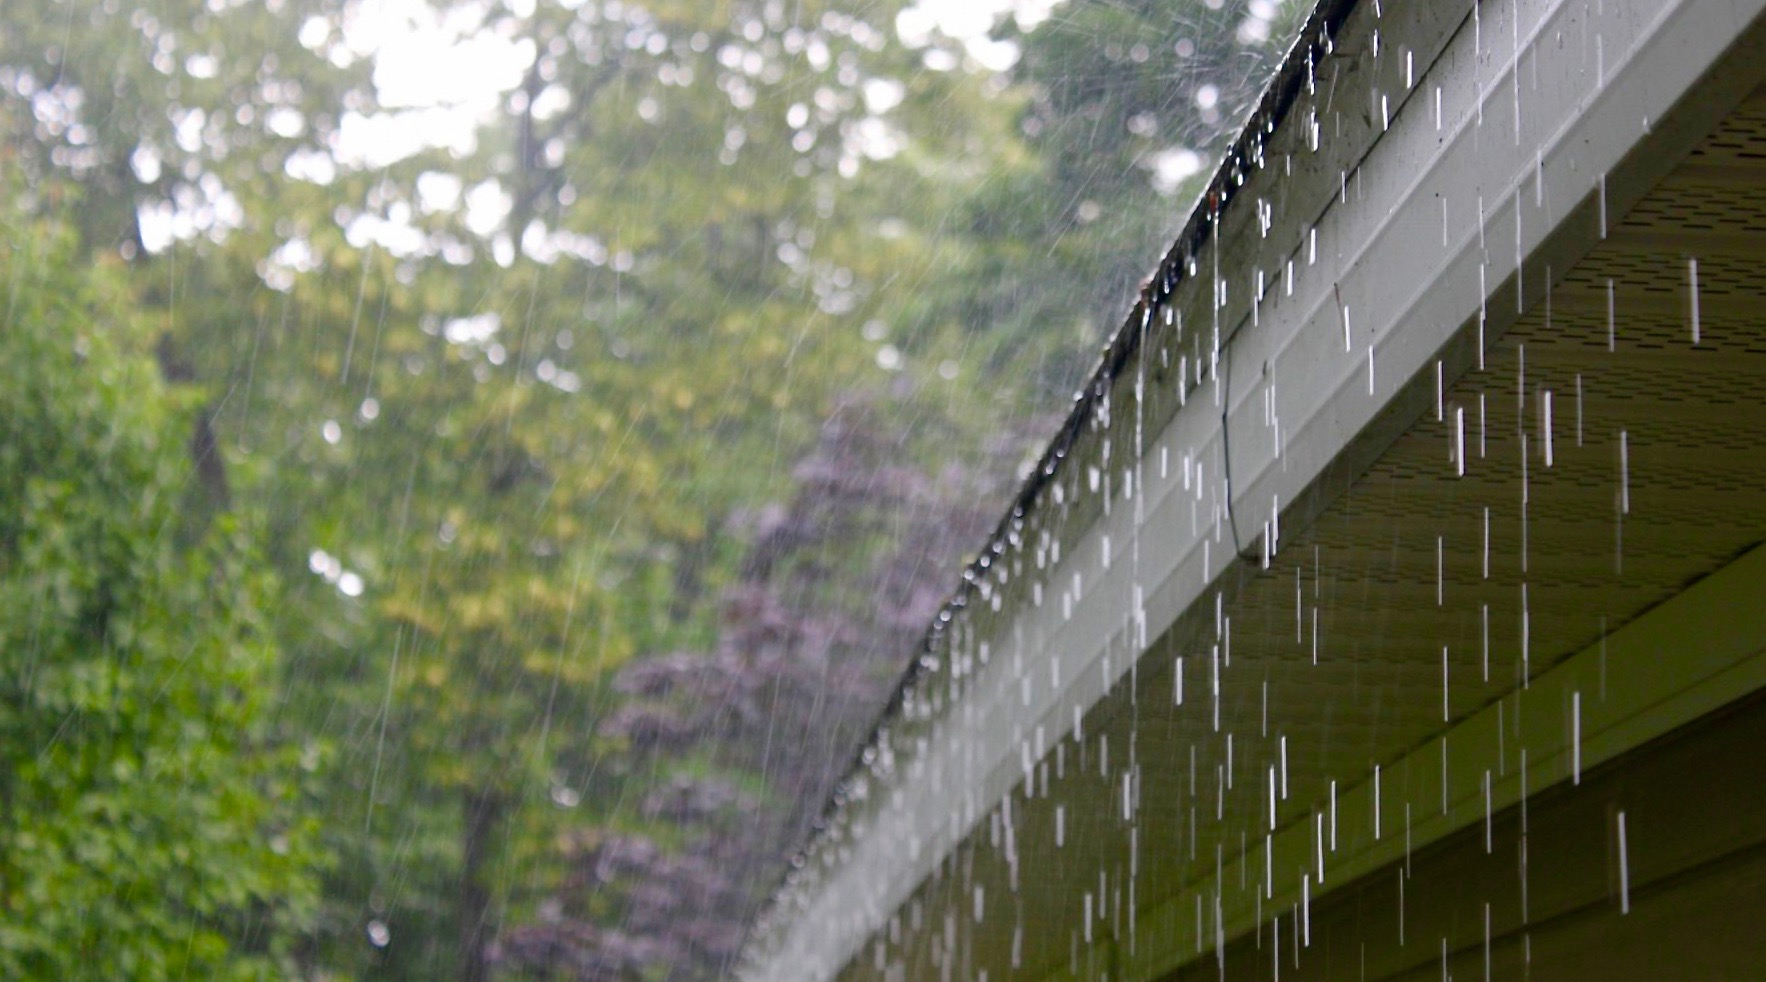 Winter-Ready Roofs: A Guide to Preparing for Pacific Northwest Rain and Snow